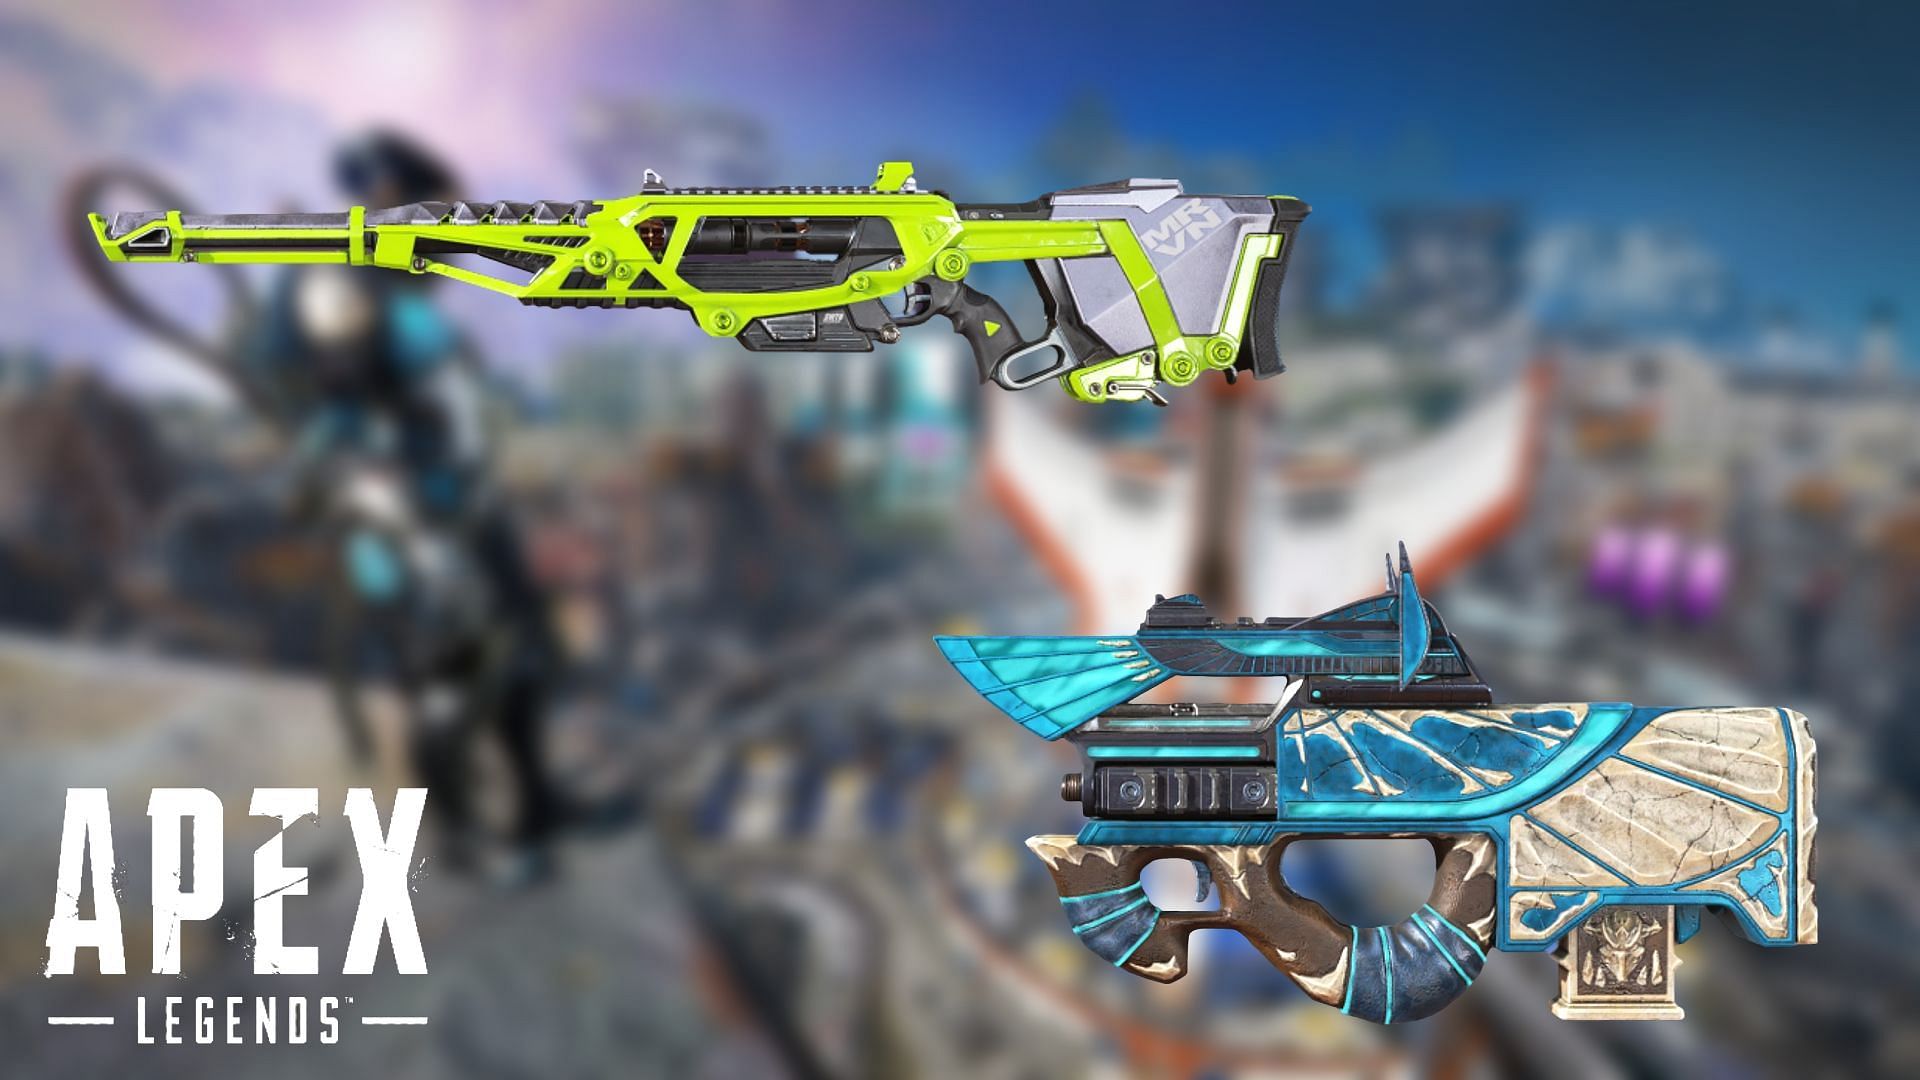 The Sentinel and Prowler SMG will be receiving major buffs in Apex Legends (Image via EA)